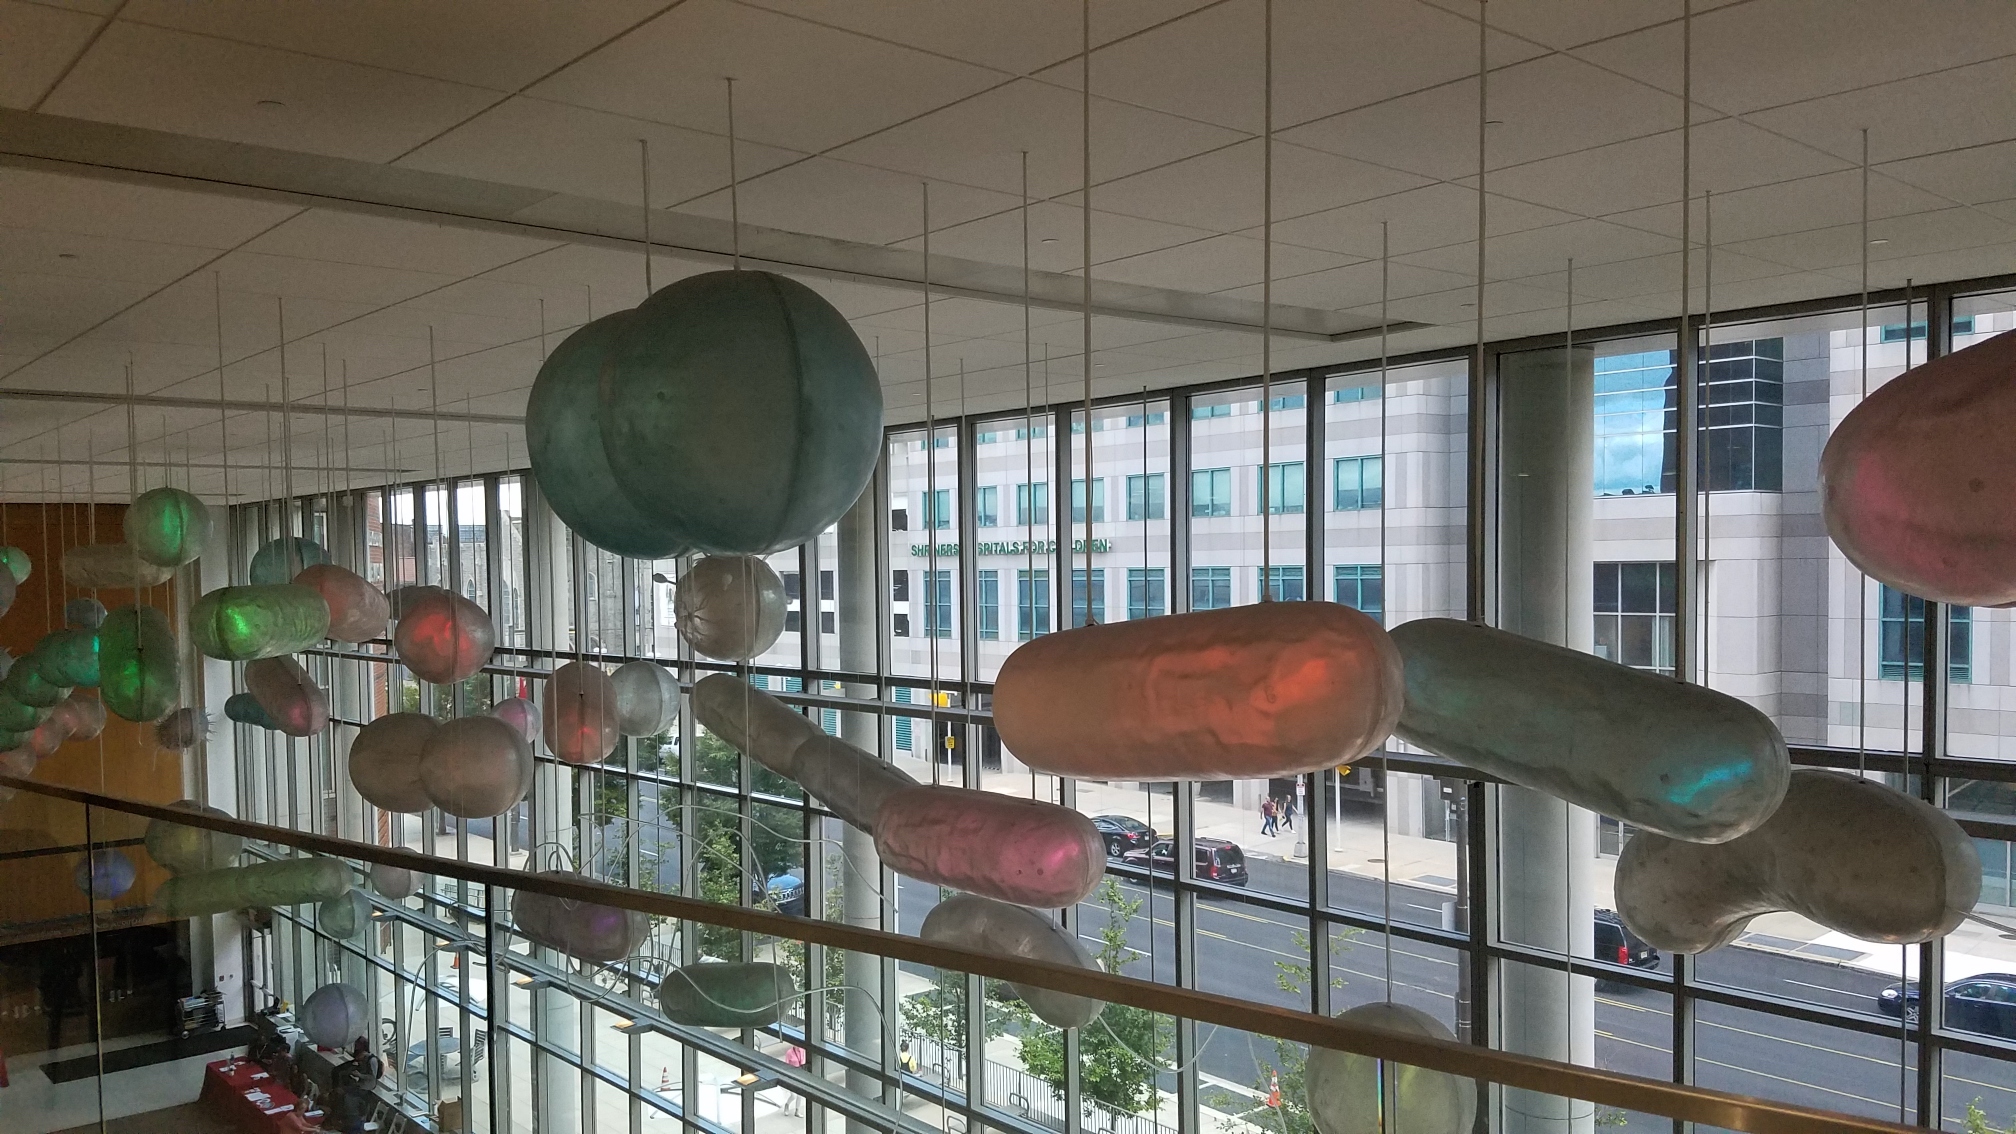 Sculptures of cells hanging in the lobby of Temple's school of medicine.